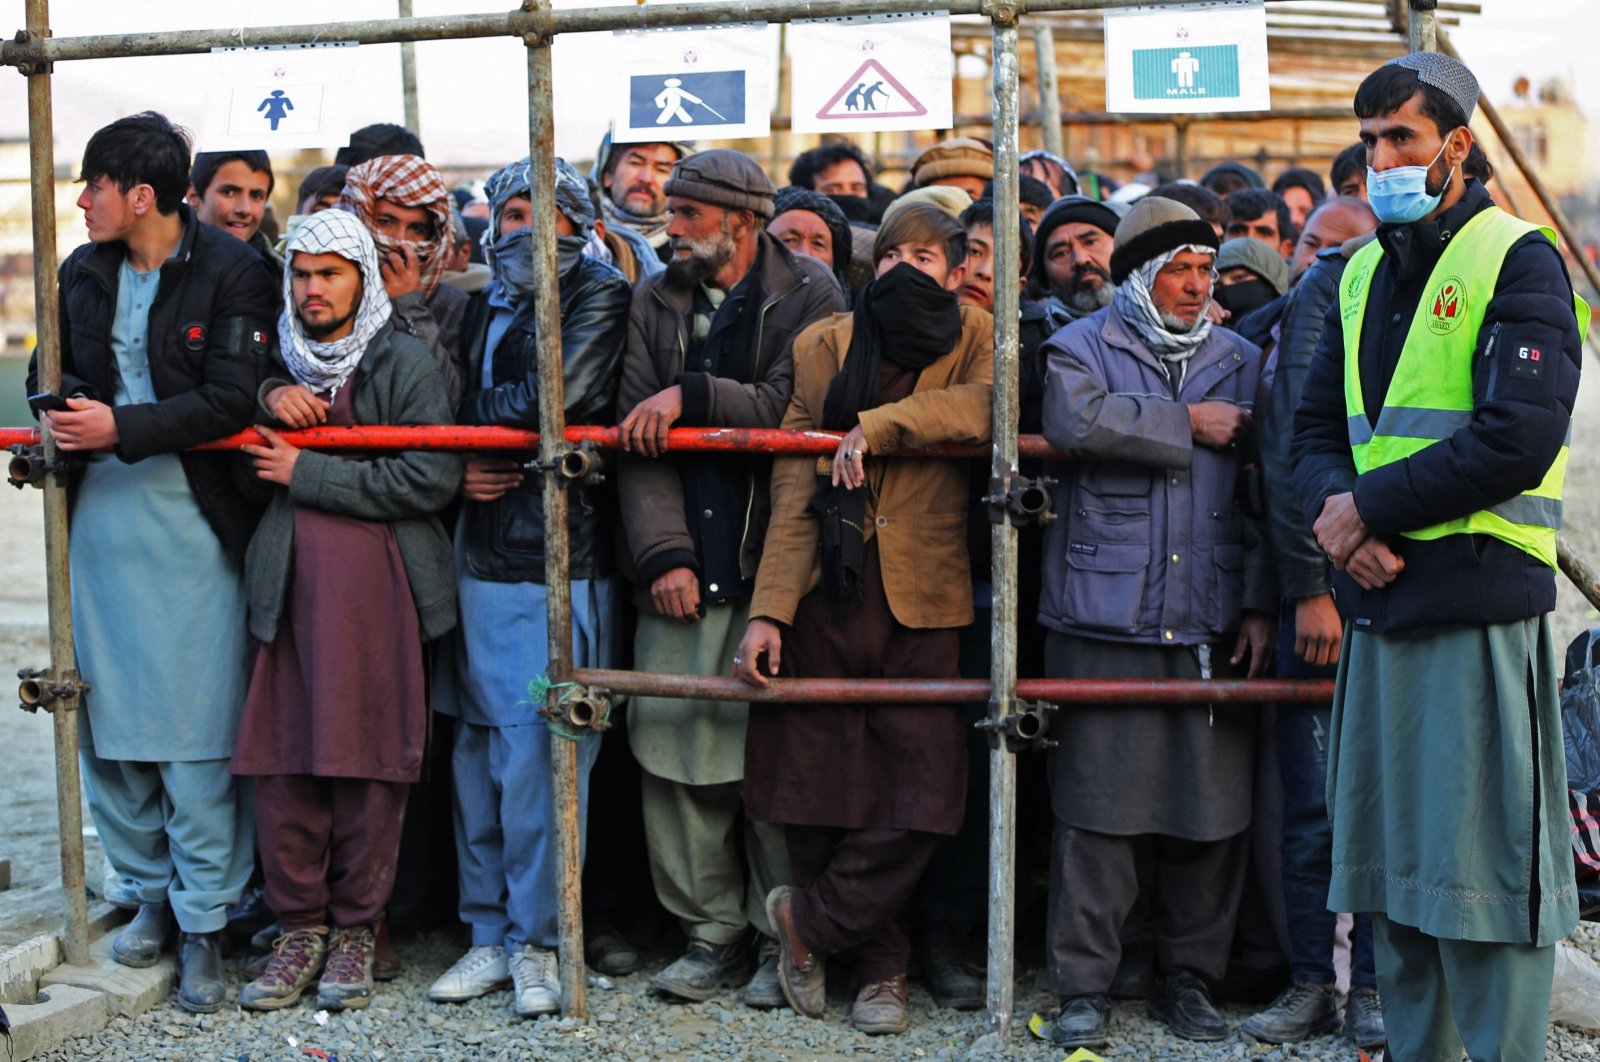 Afghan men stand in queues to receive food aid from an NGO in Kabul, Afghanistan, Dec. 25, 2022. (AFP Photo)